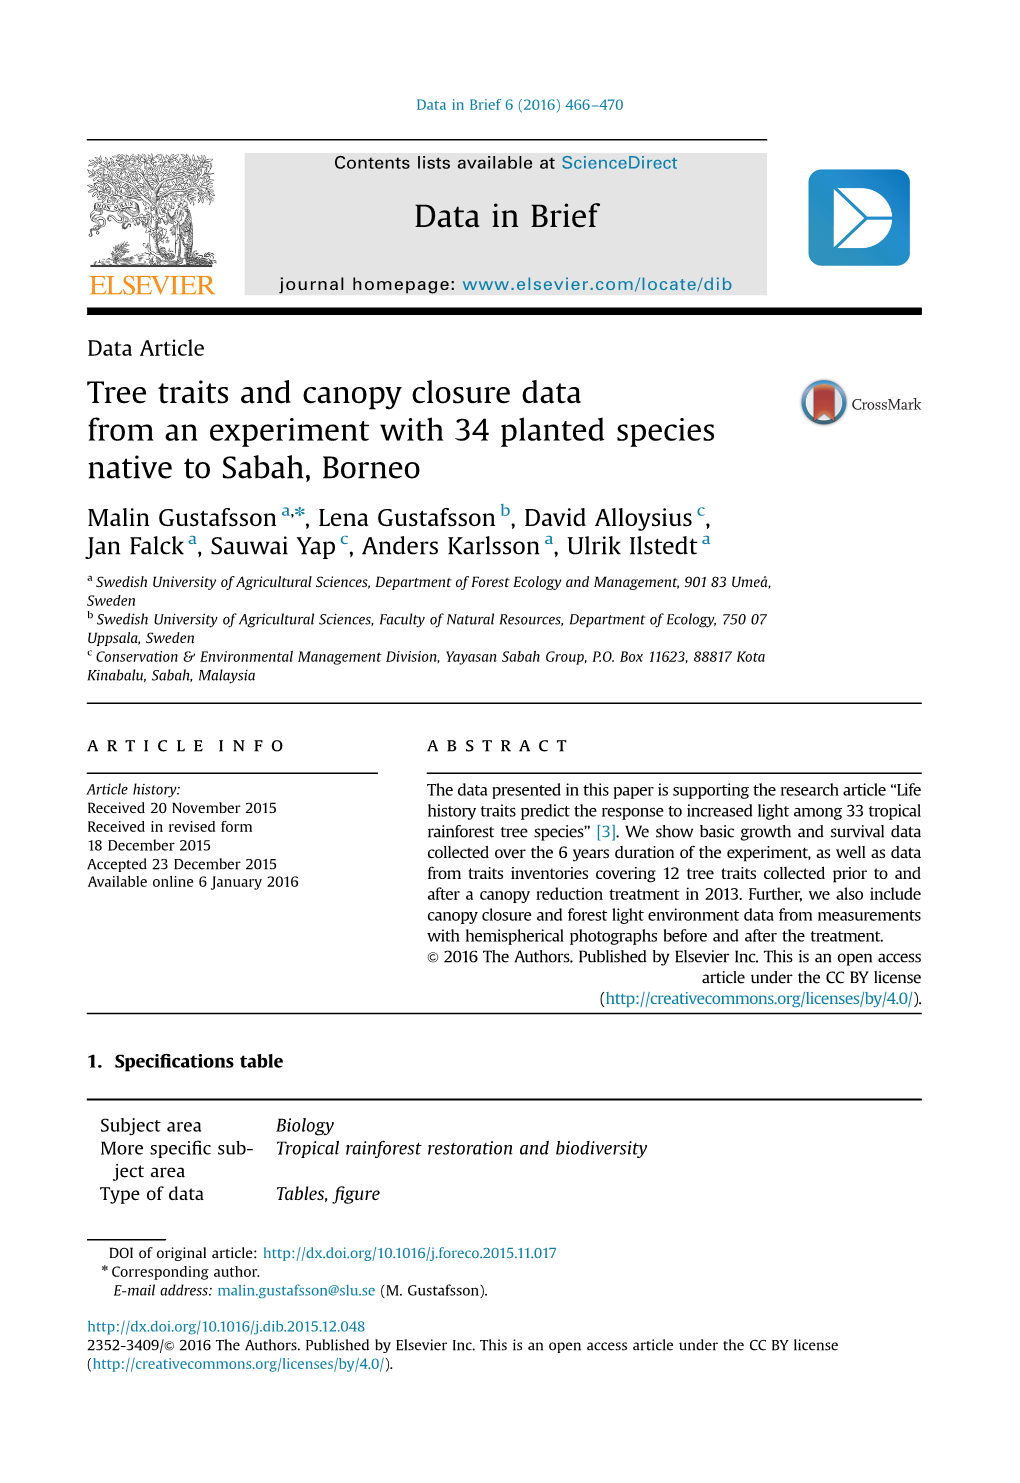 Tree Traits and Canopy Closure Data from an Experiment with 34 Planted Species Native to Sabah, Borneo